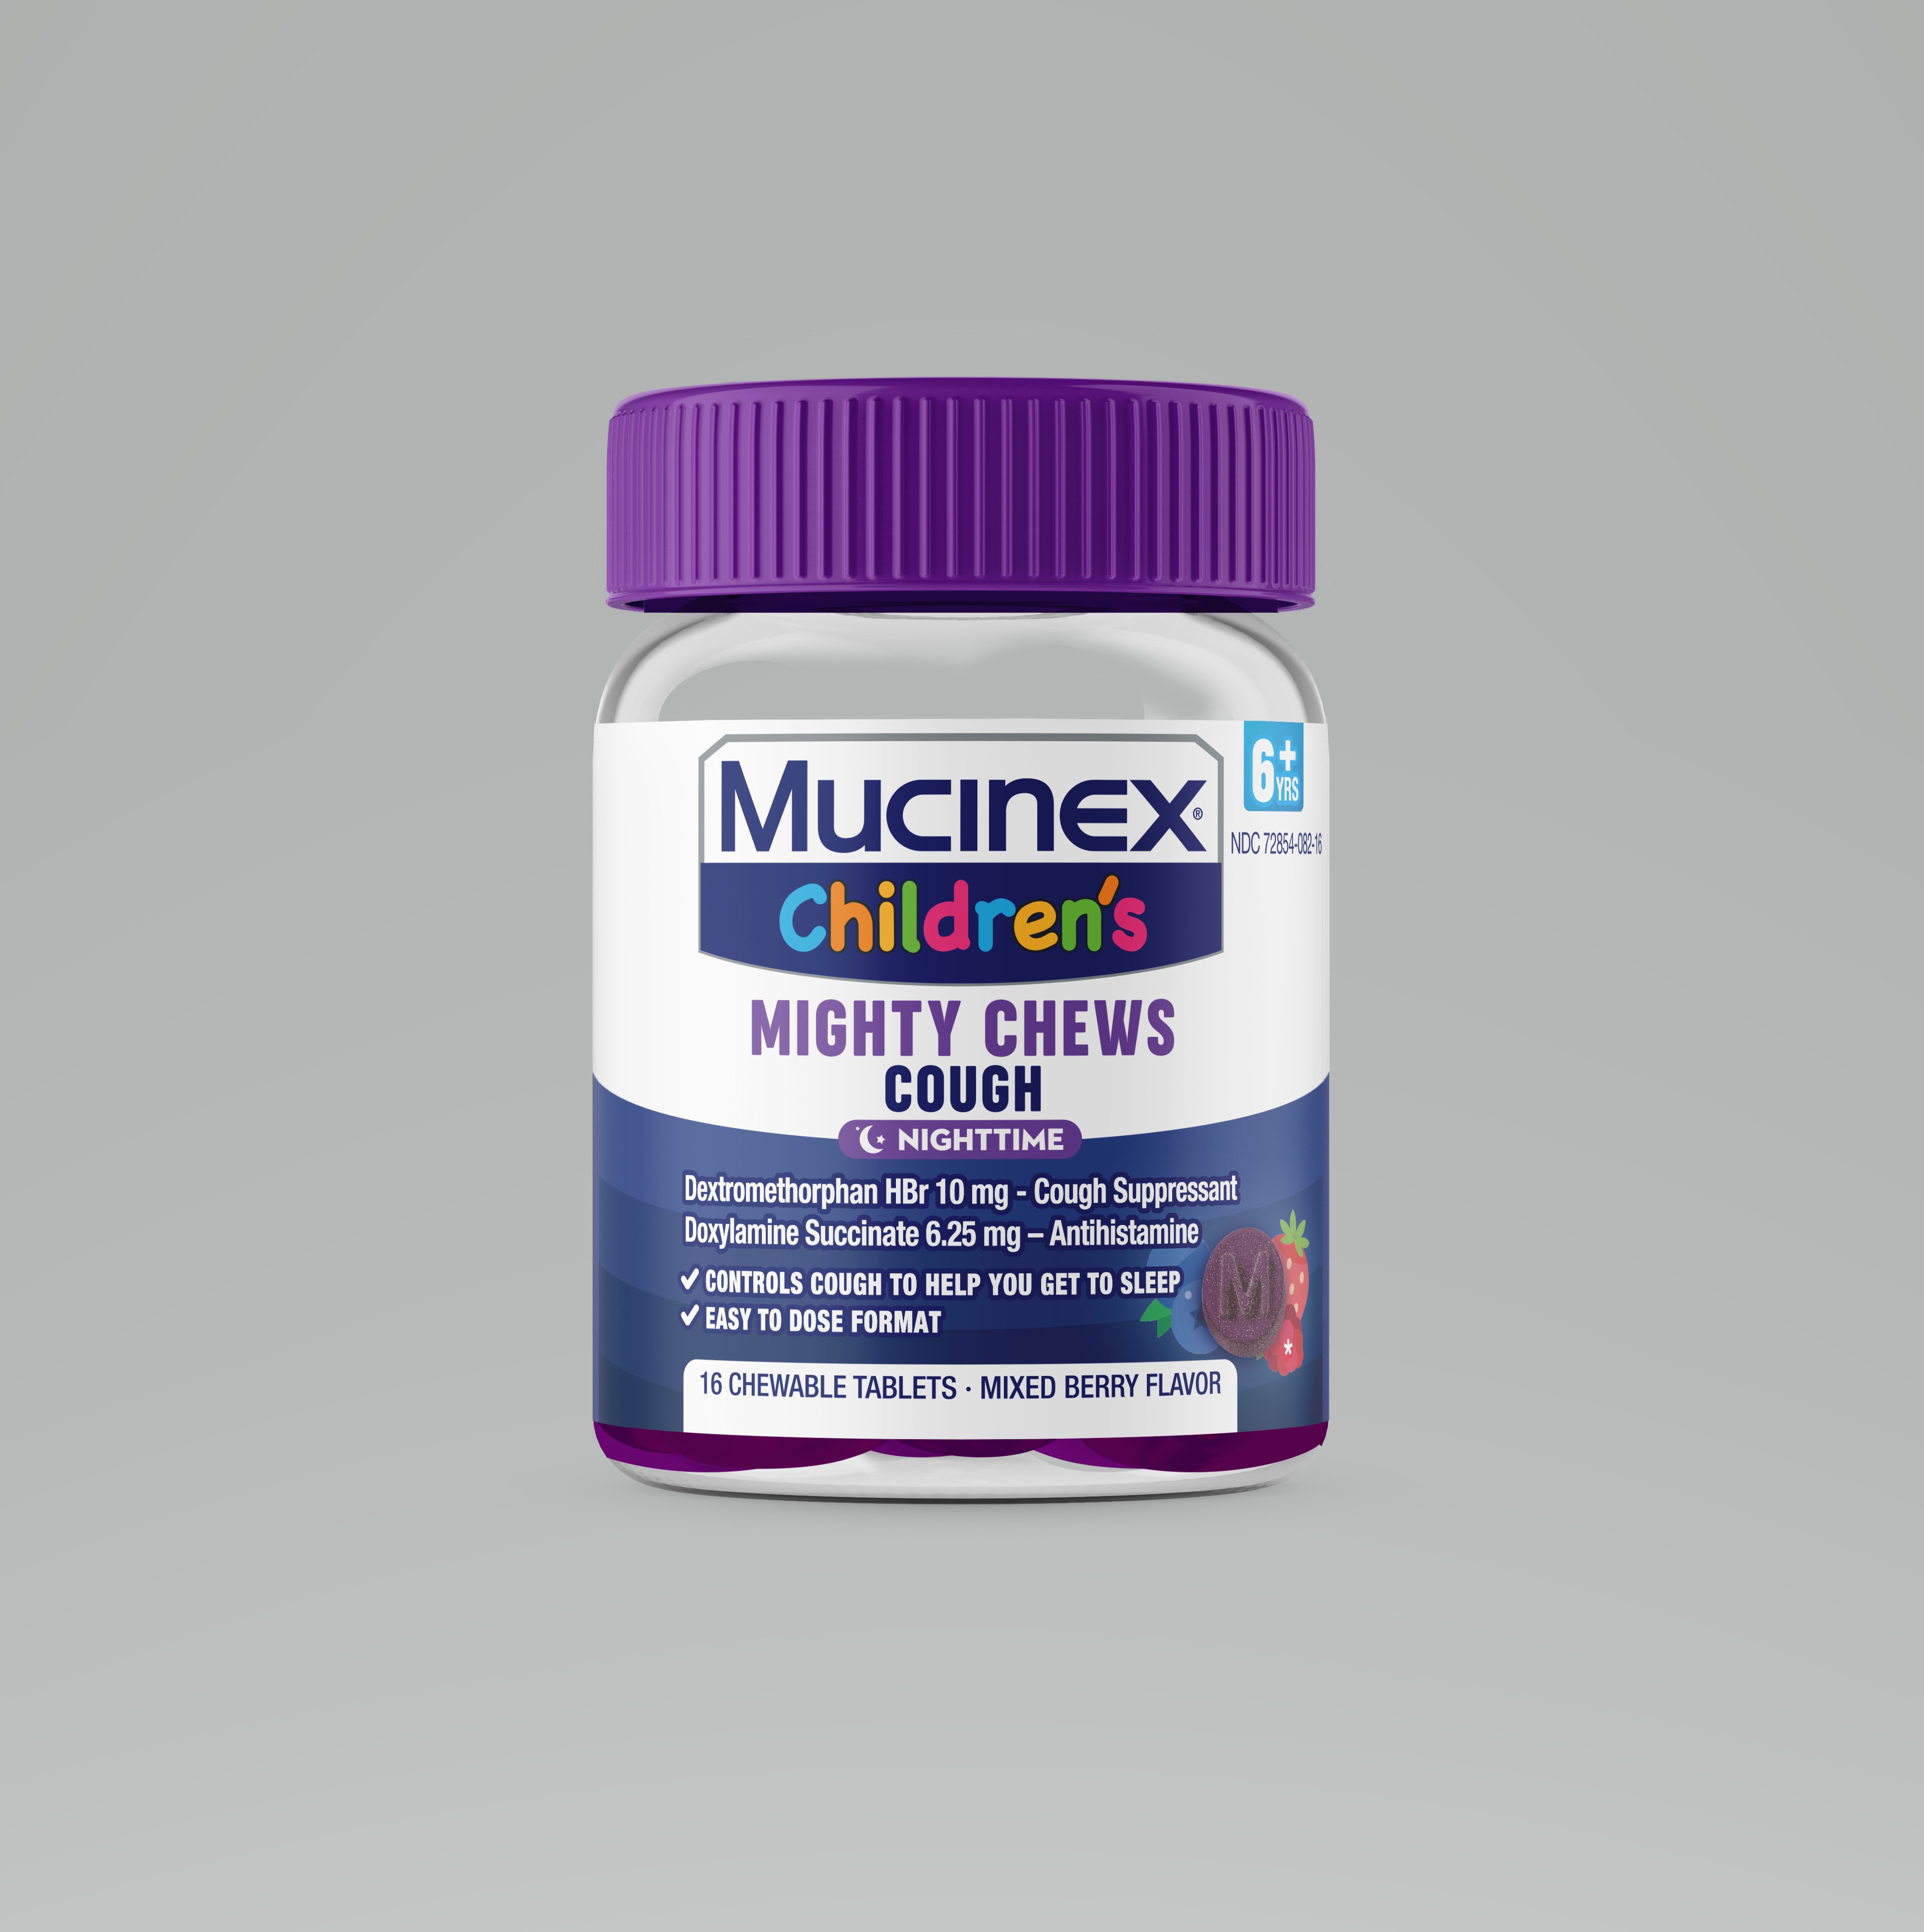 MUCINEX Childrens Mighty Chews  Nighttime Cough  Mixed Berry Flavor